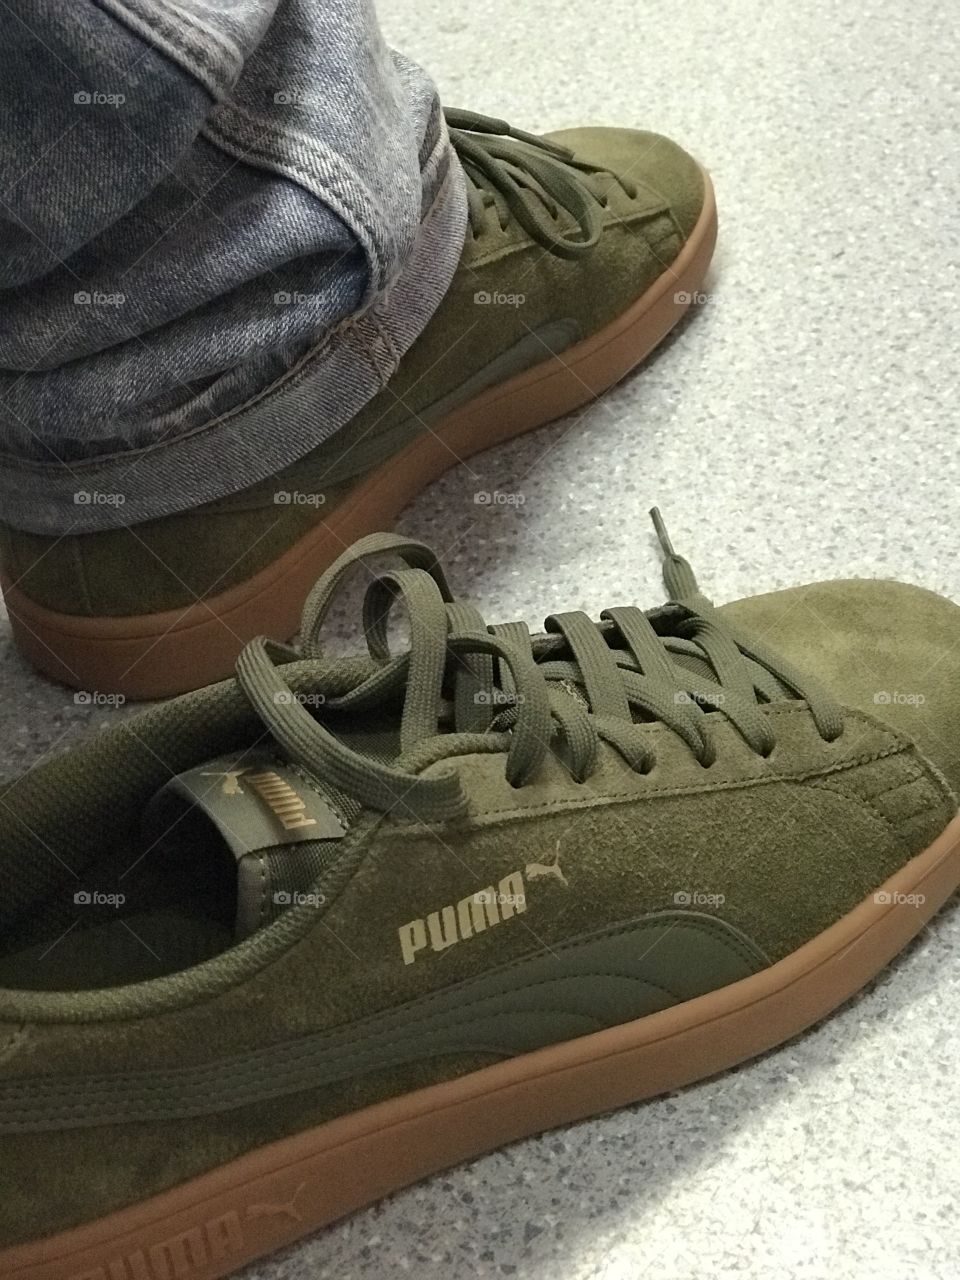 These Olive green Puma Smash Suede Sneakers are beautiful for an autumn outfit combination